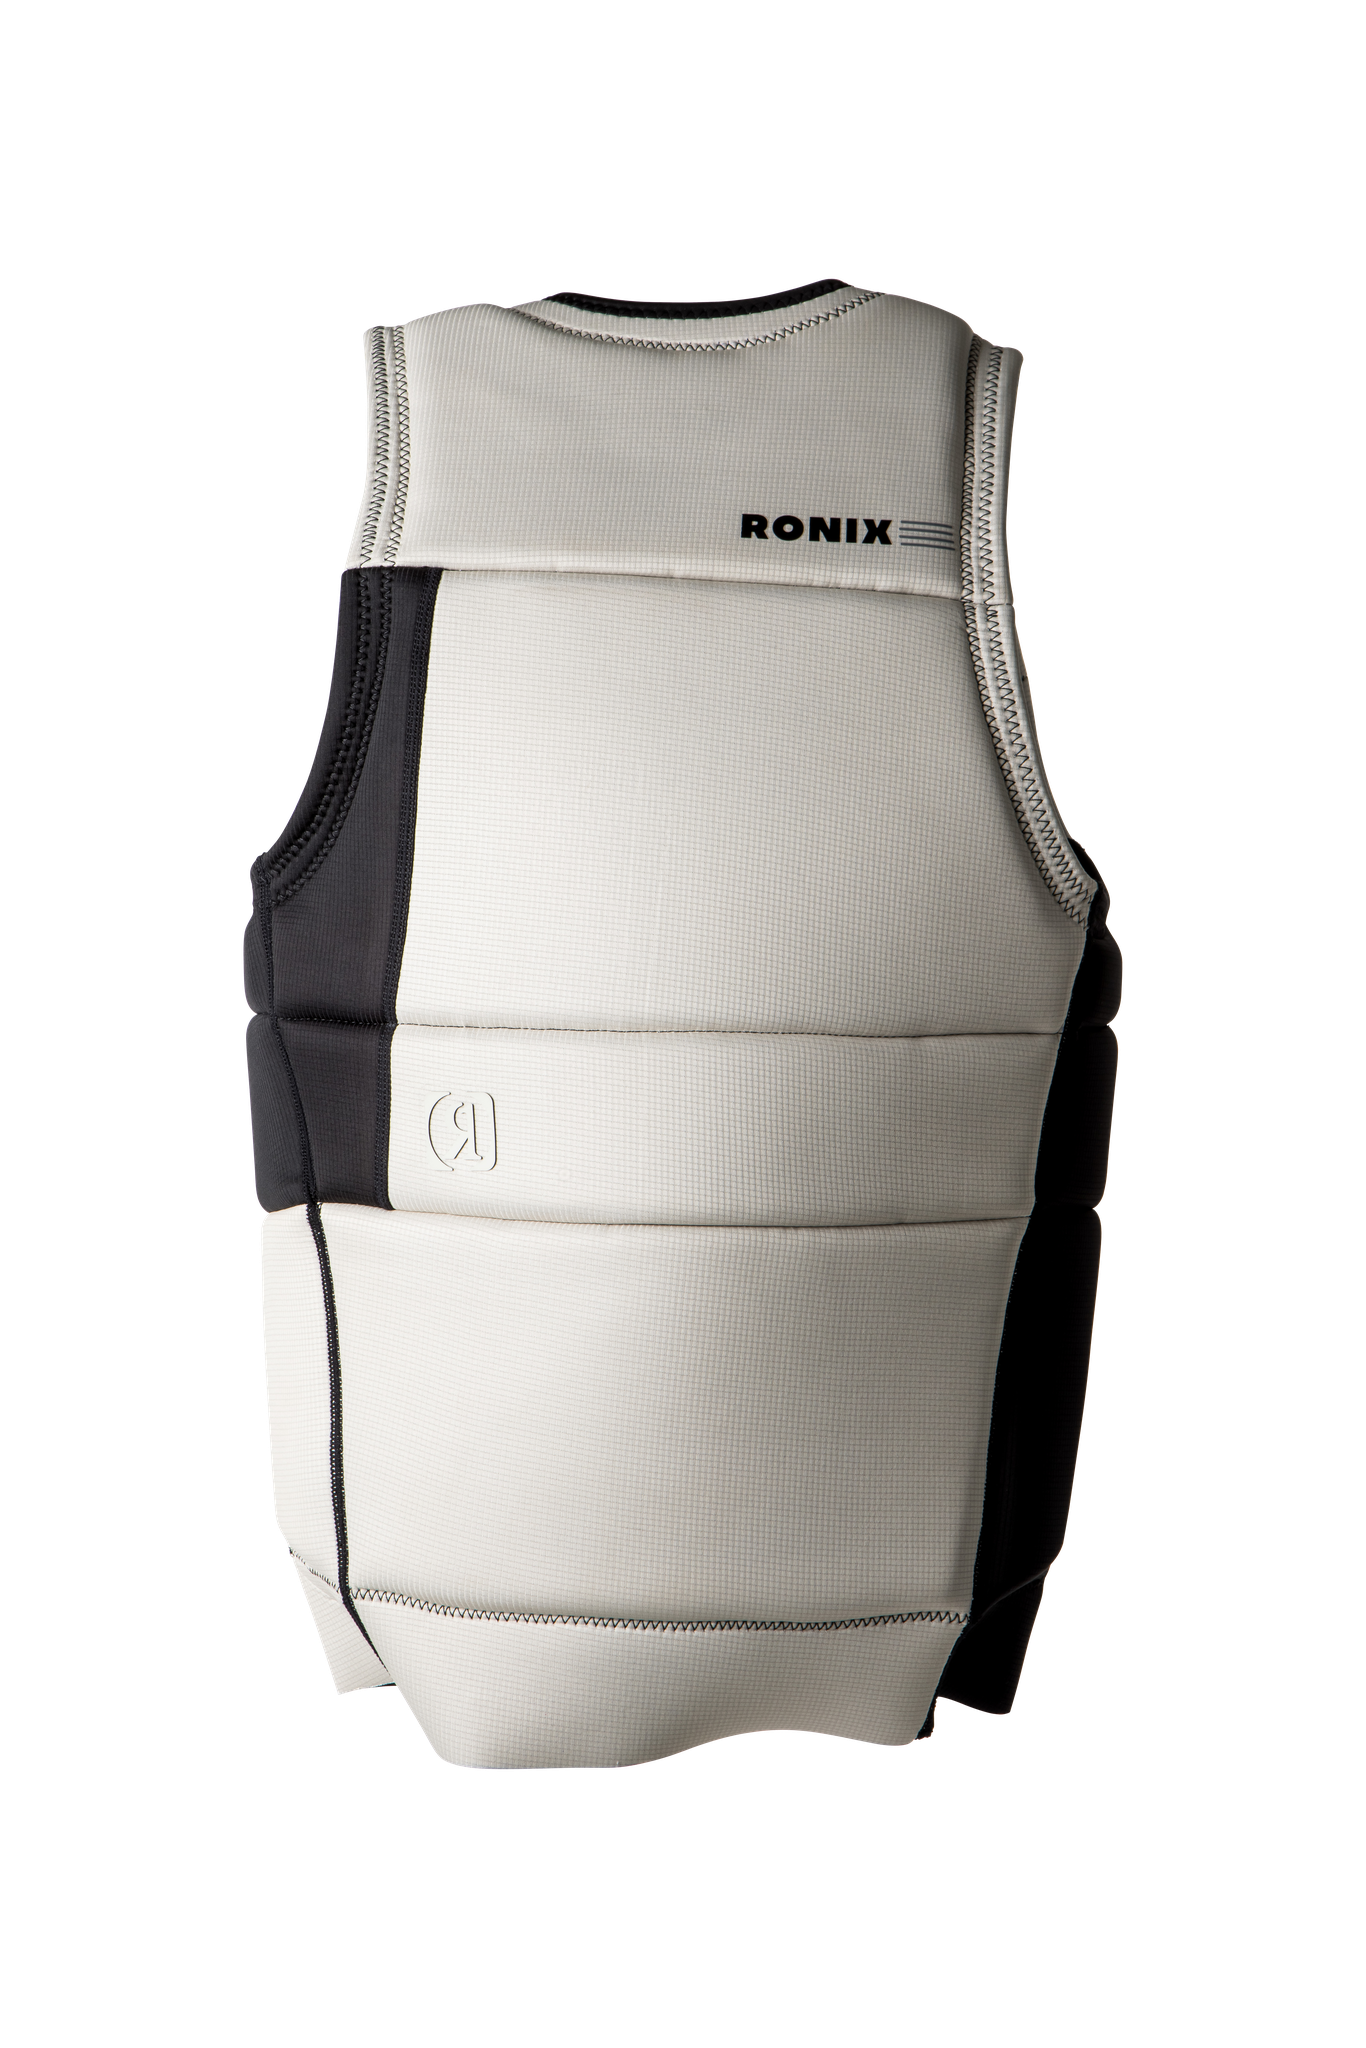 A white and black Ronix 2024 Supreme CE Approved Impact Vest with the word "roma" on it, ideal for impact styling.